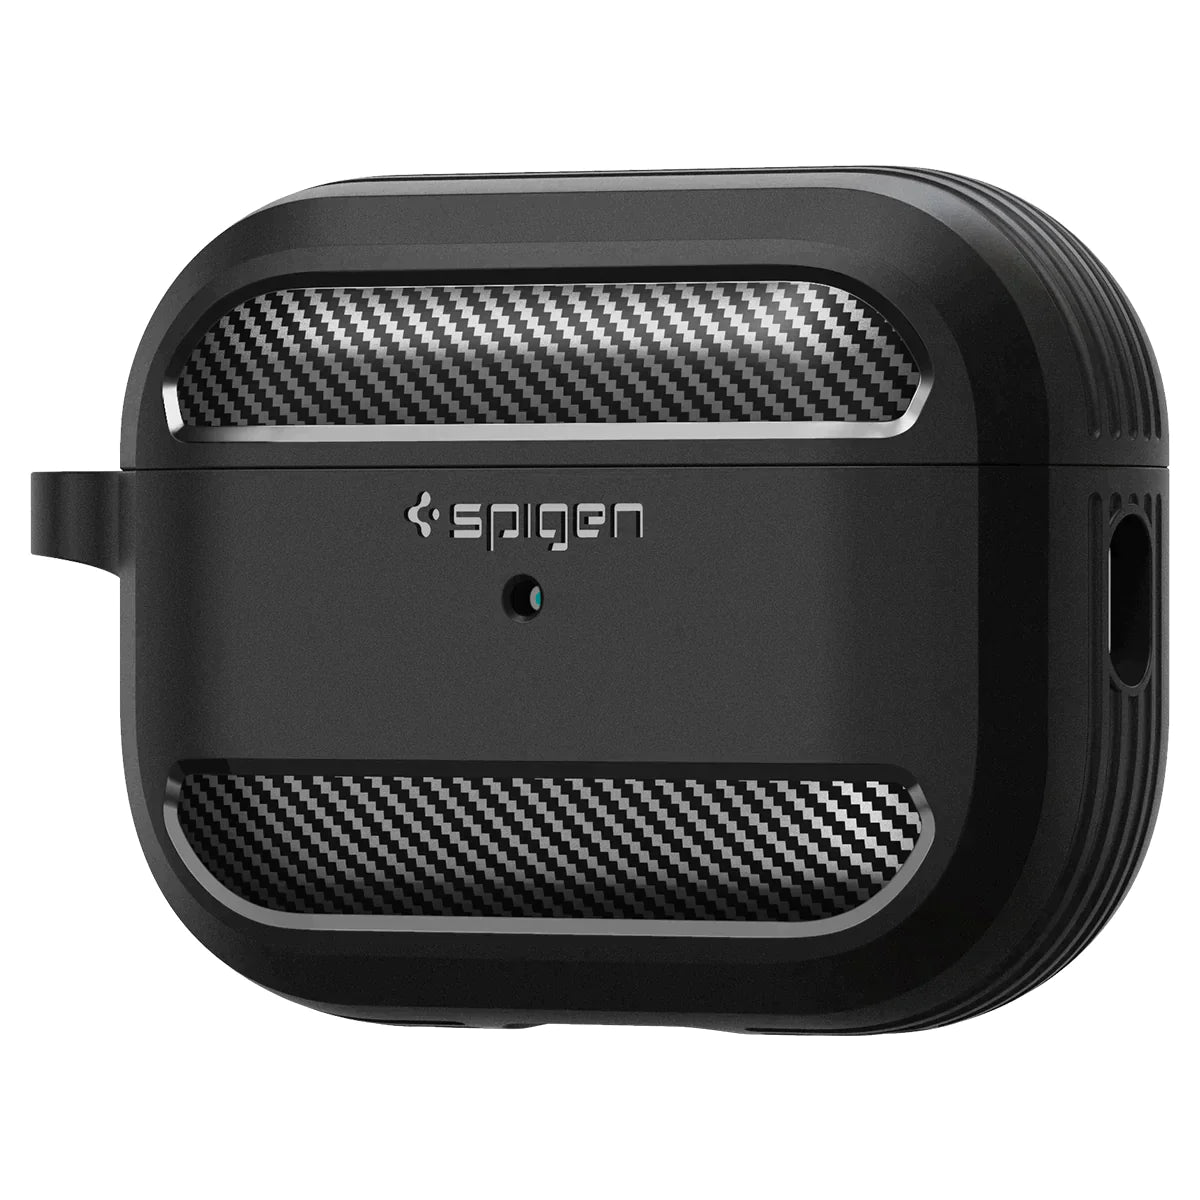 Airpods Spige Rugged Armor Case